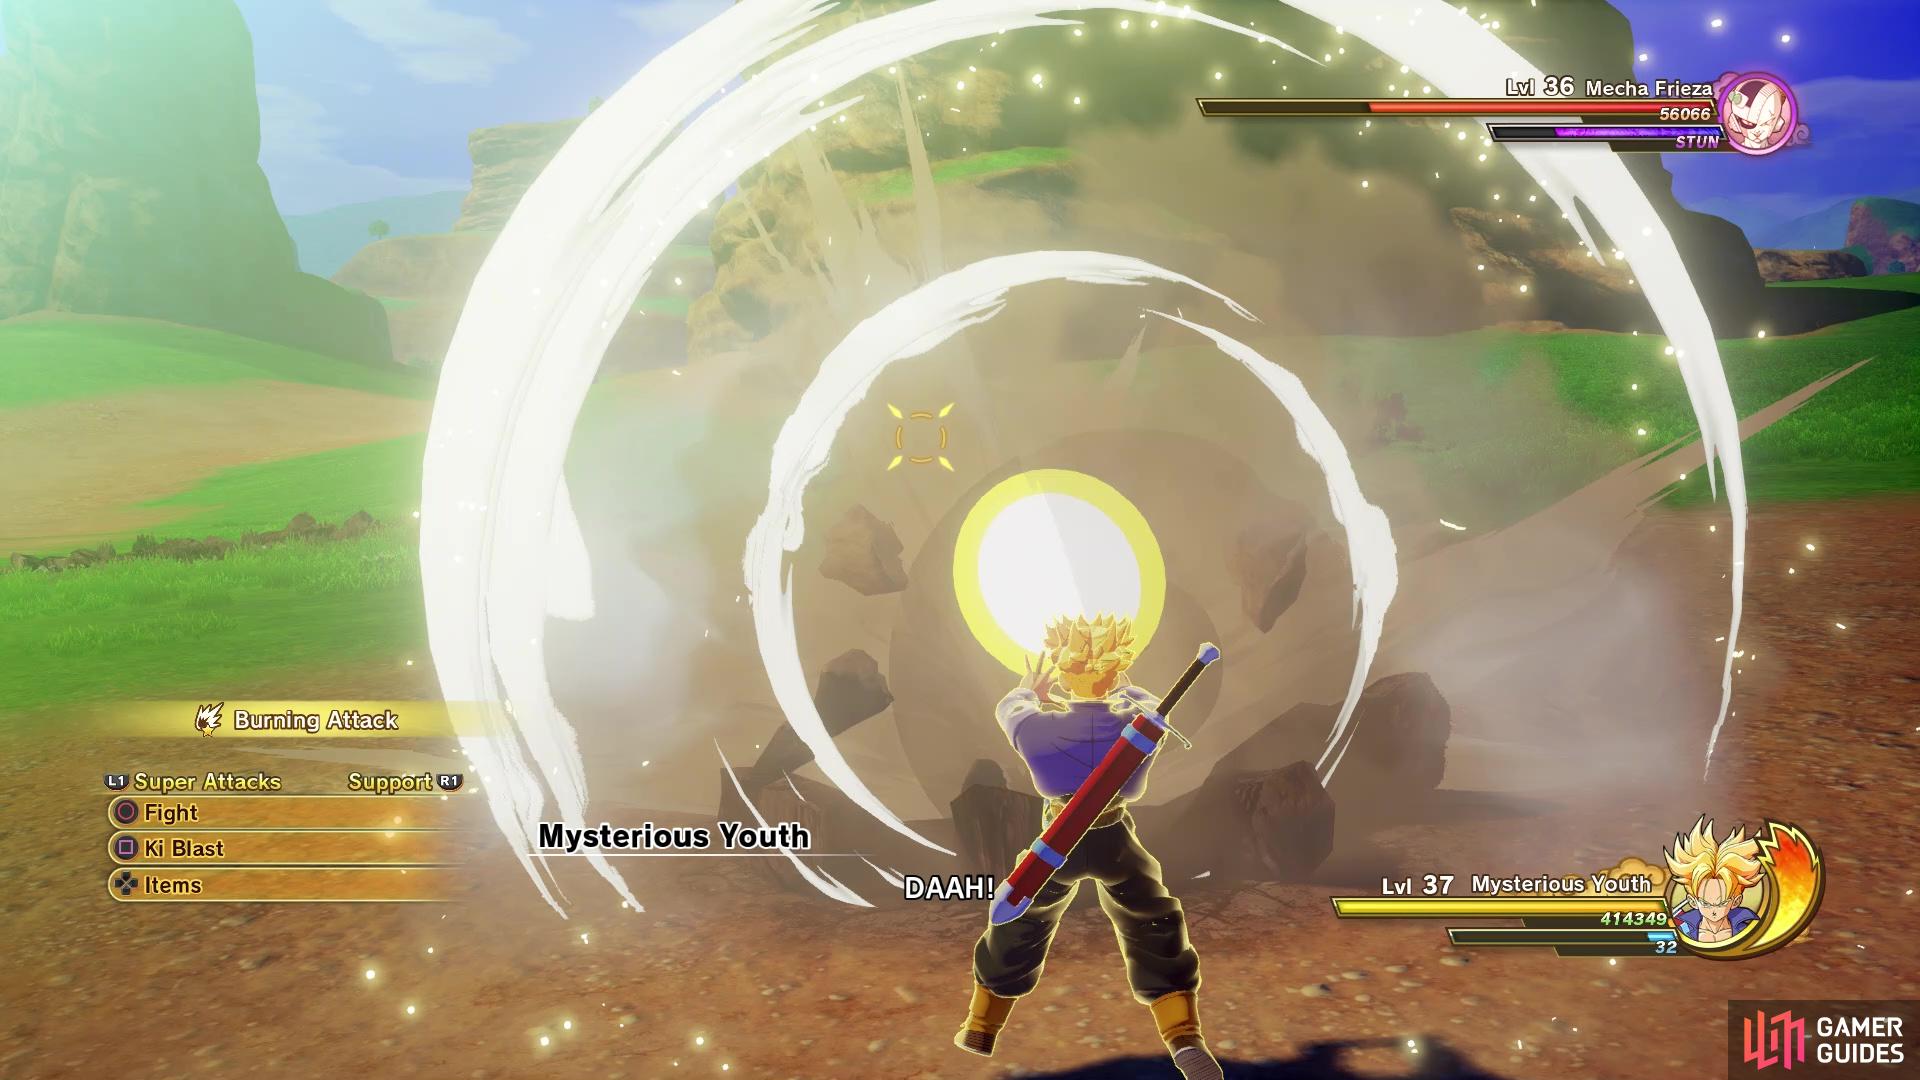 Burning Attack will knock off a good chunk of Frieza’s health